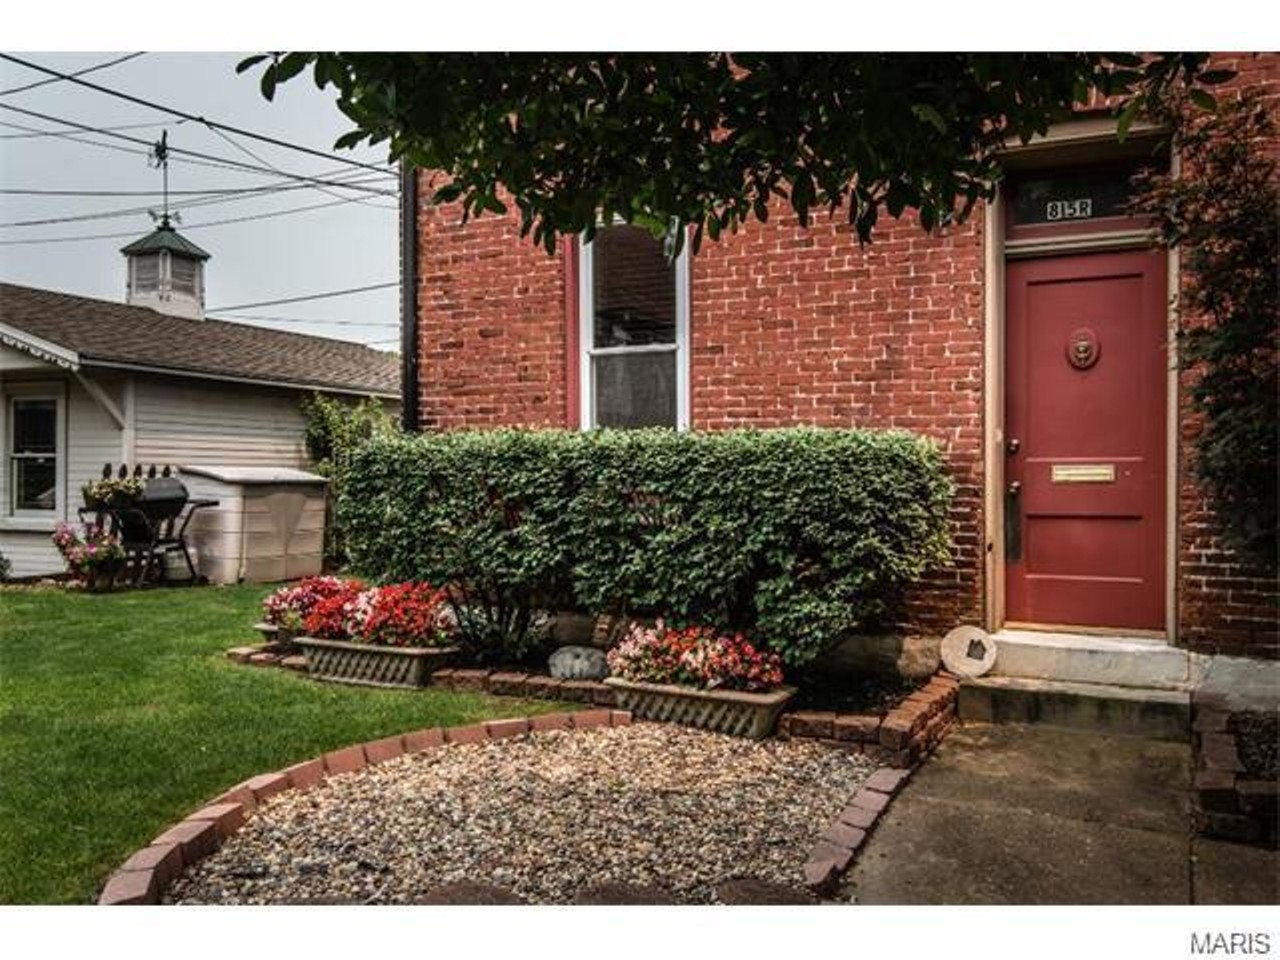 815 Rutger Street Unit R
St Louis, MO 63104
$127,000
2 beds / 2 baths / 1,168 sqft
21 minute walk to Lafayette Park. Directions here. 
This unassuming home might just steal your heart when you step inside. With fireplaces in the bedrooms and other period features, this home has the perfect combination of modern updates and vintage charm. You'll have hardwood floors, a fully finished third (yes, third) floor for bonus space, a private parking space and more.